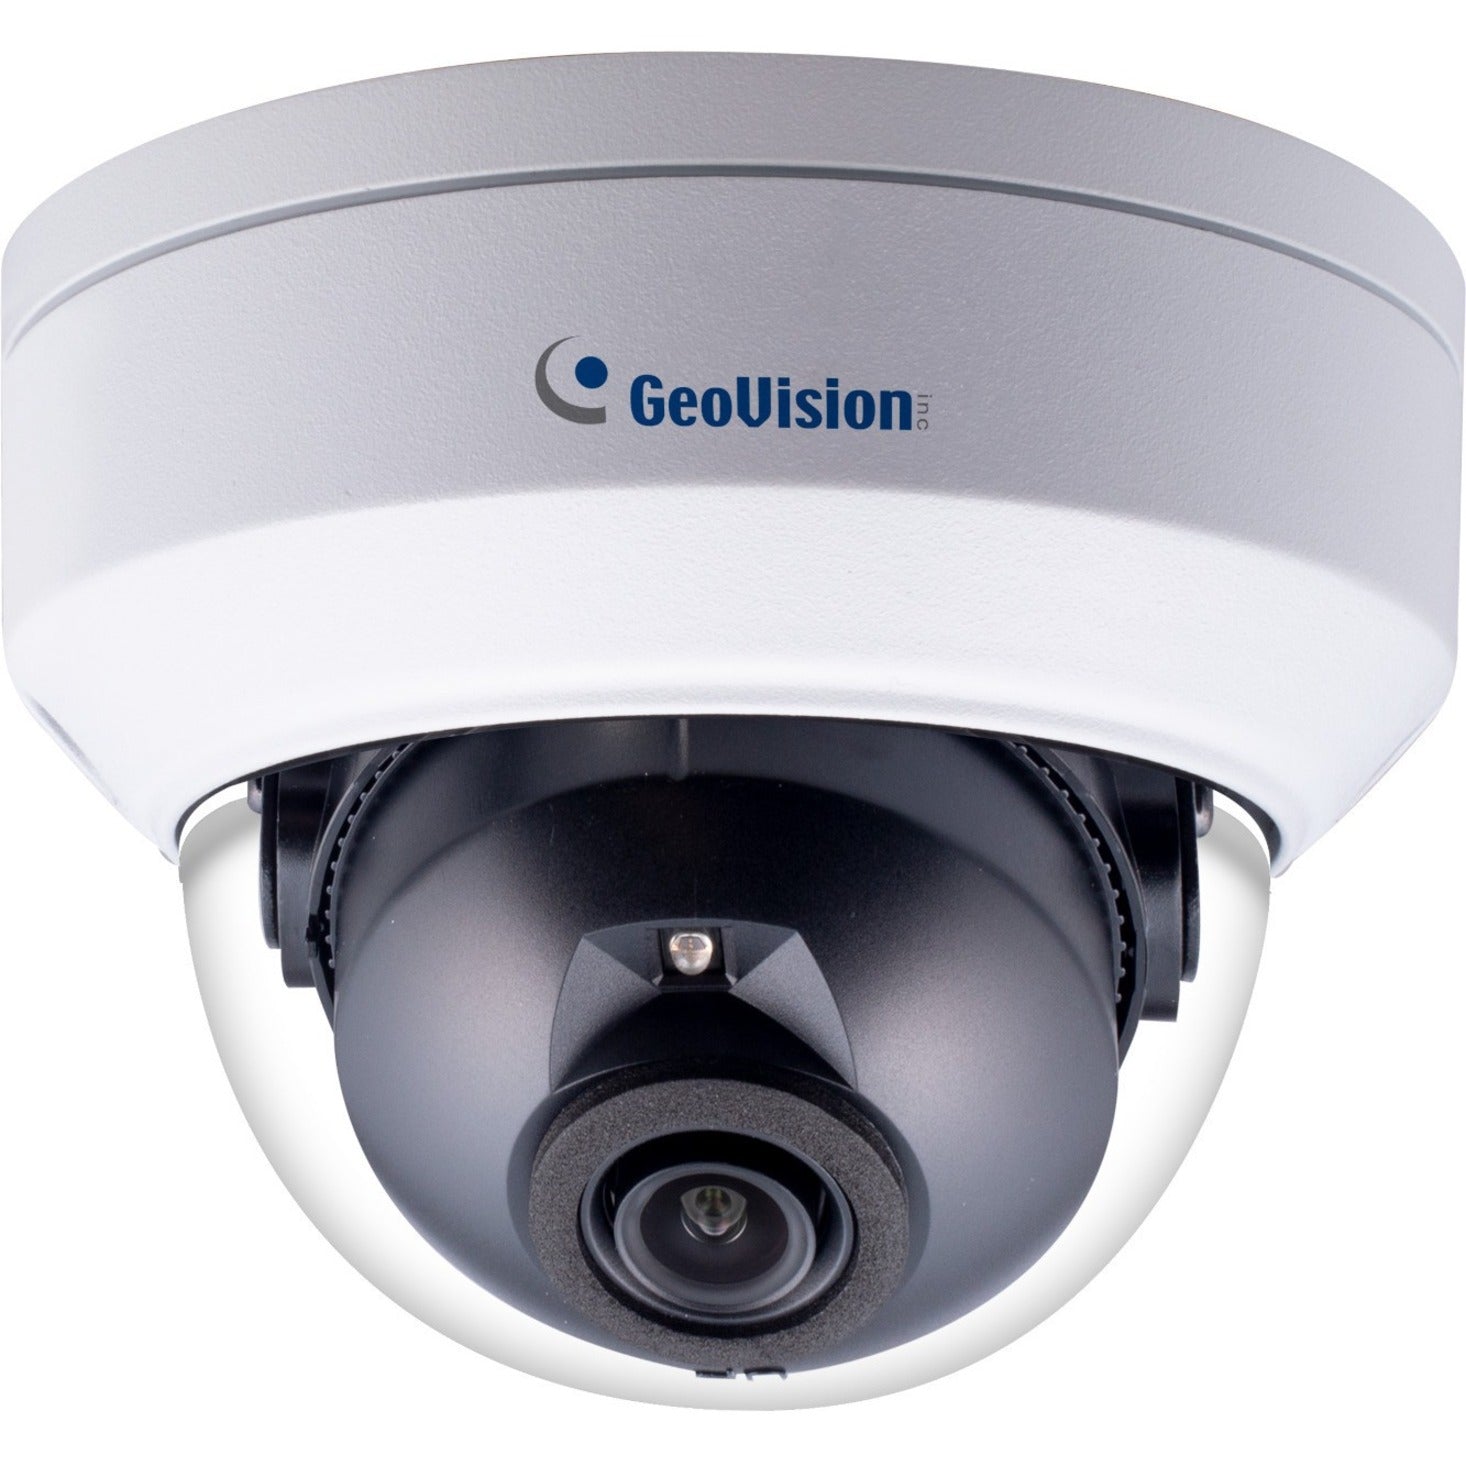 GeoVision 125-TDR4803-002 AI 4MP Super Low Lux WDR Pro IR Mini Dome, Outdoor Security Camera